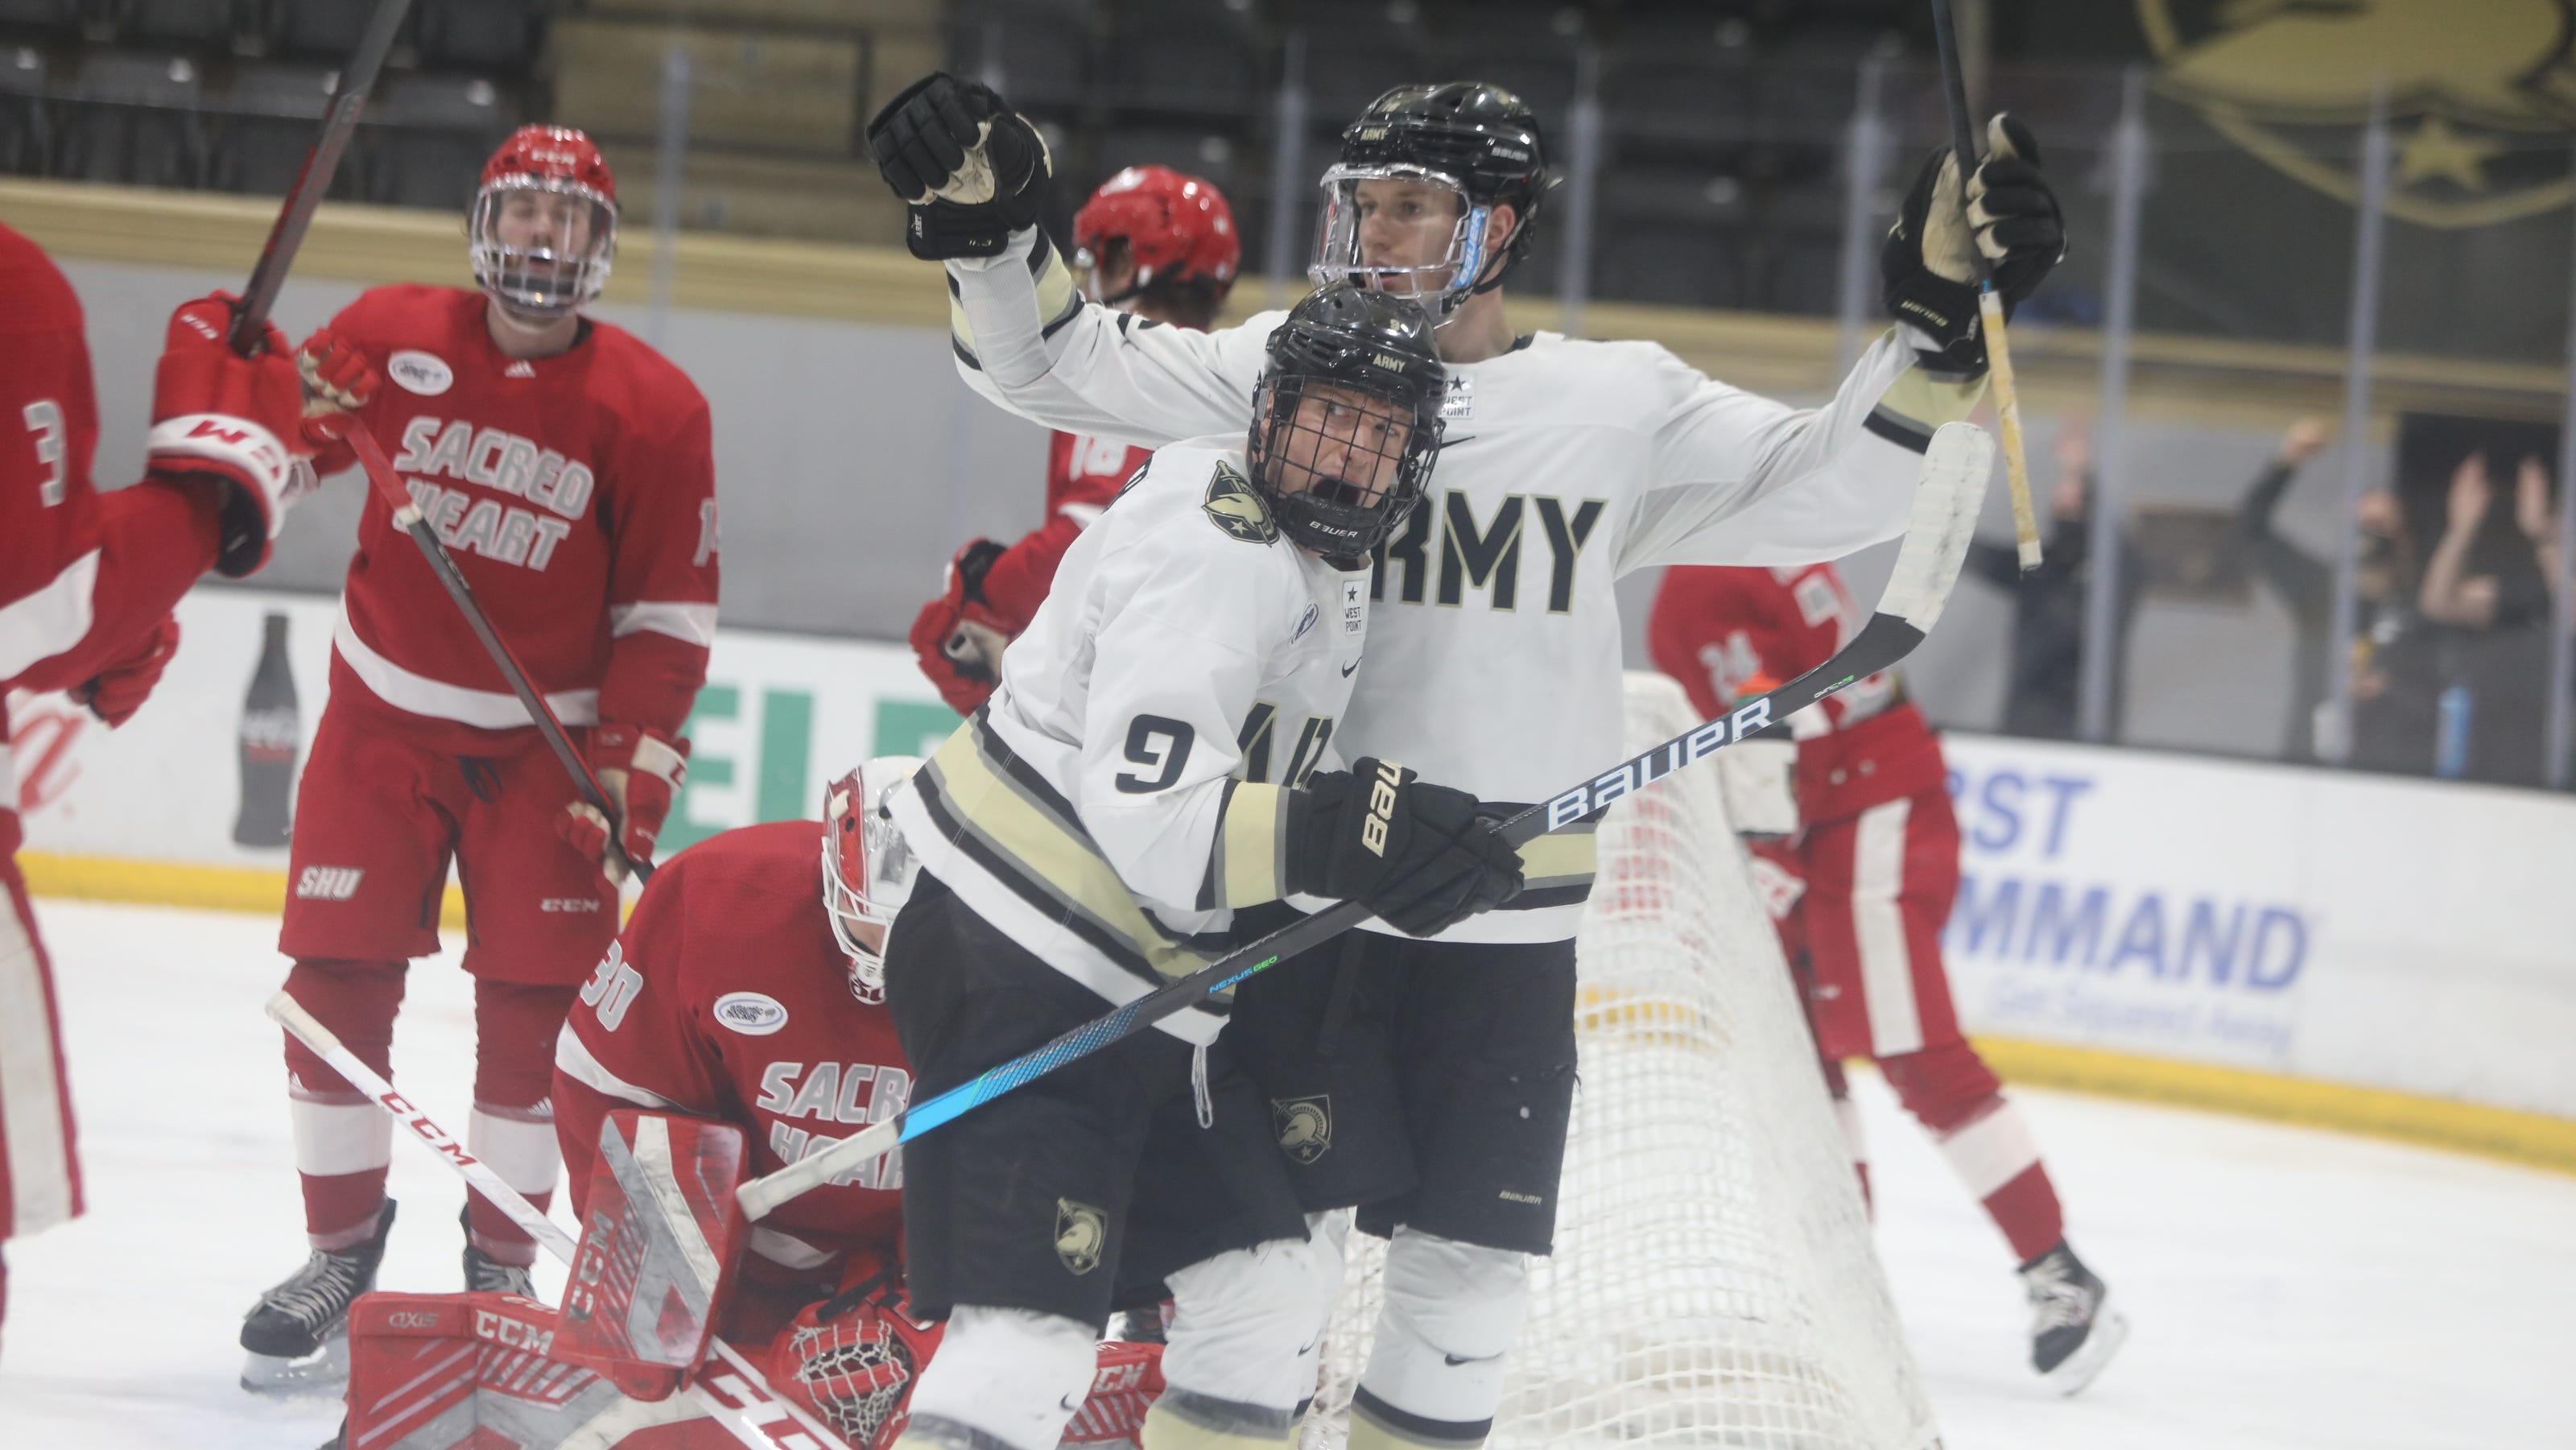 Army moves up in hockey polls, increases chances for making NCAA tourney